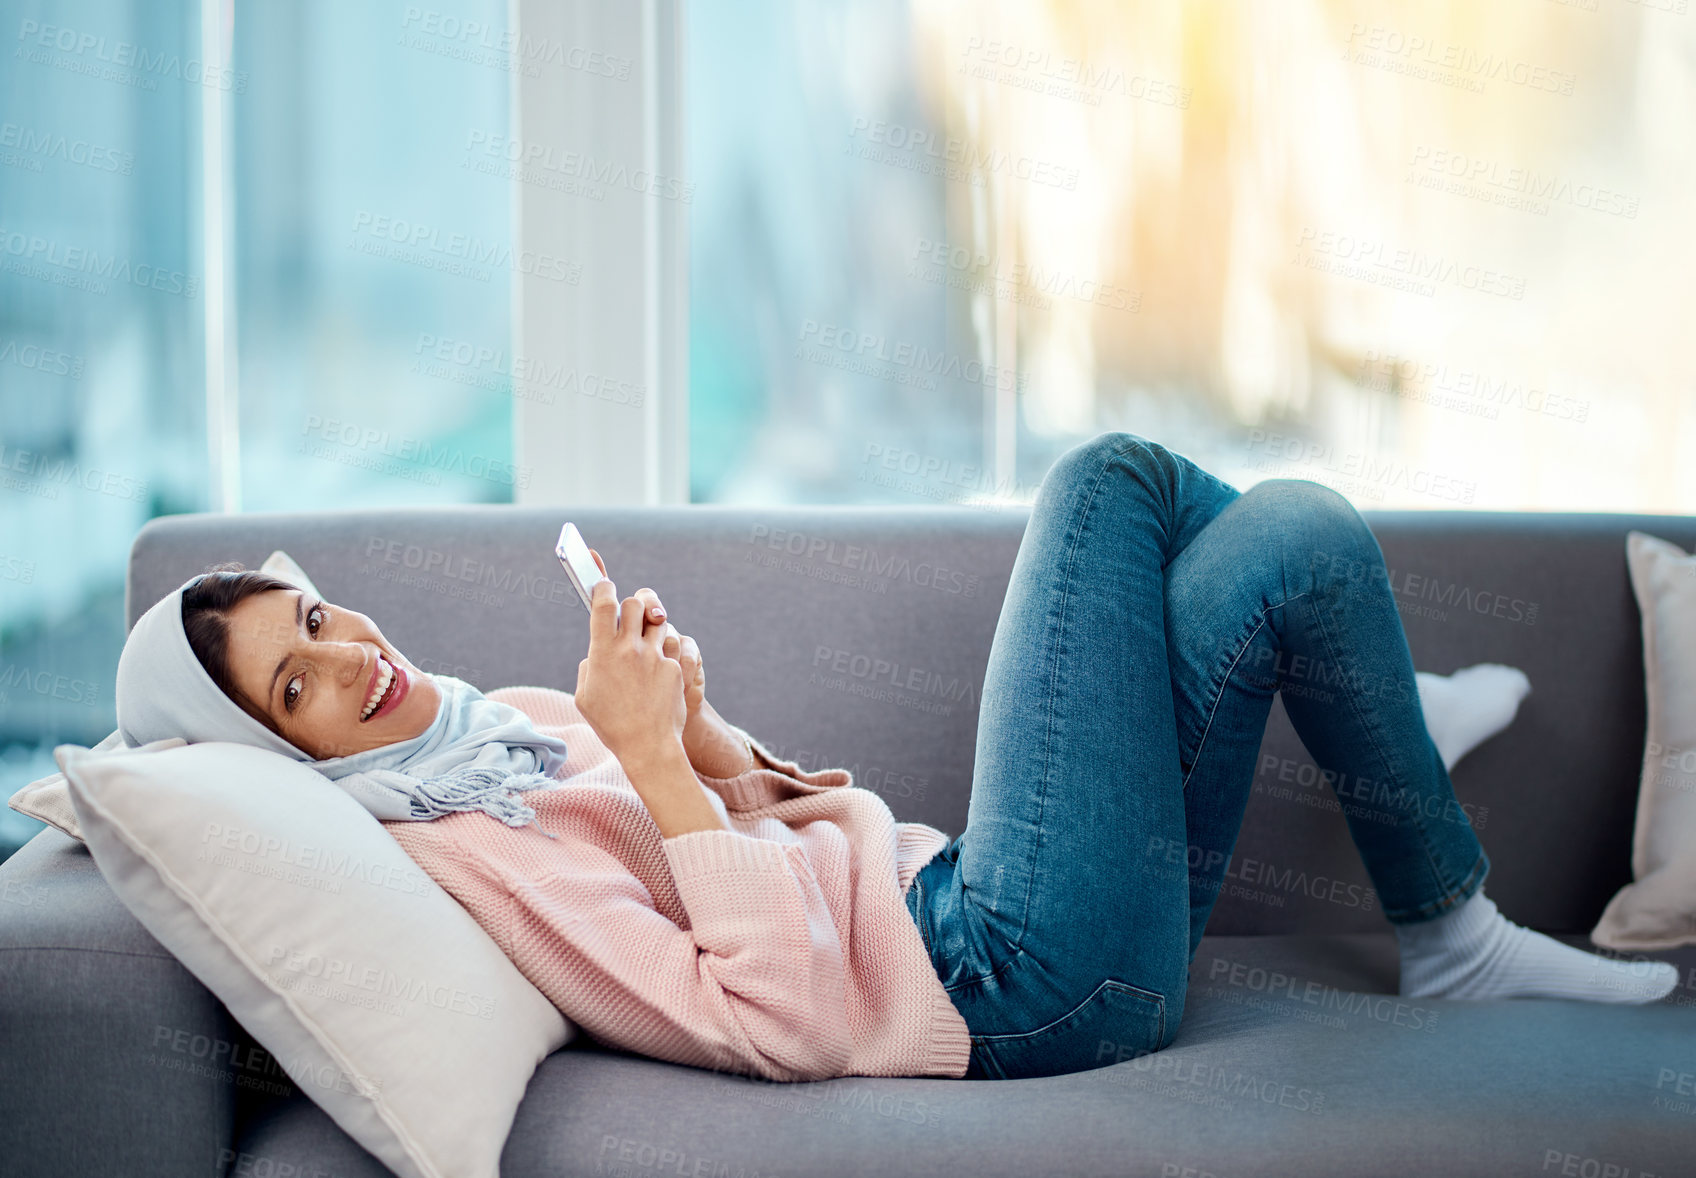 Buy stock photo High angle portrait of an attractive young woman sending a text while chilling on her sofa at home